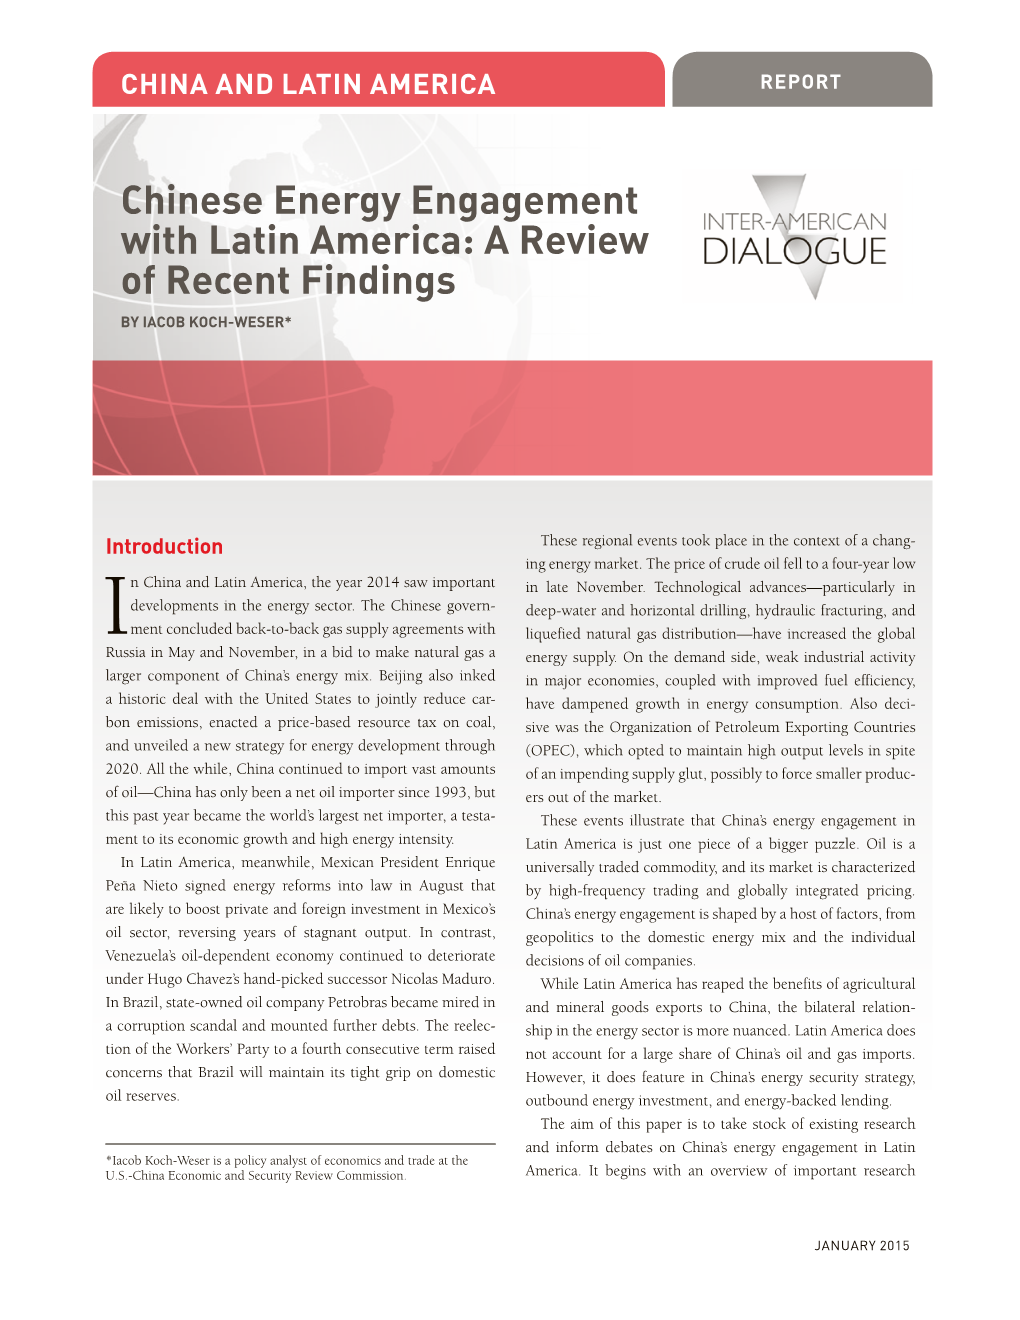 Chinese Energy Engagement with Latin America: a Review of Recent Findings by IACOB KOCH-WESER*